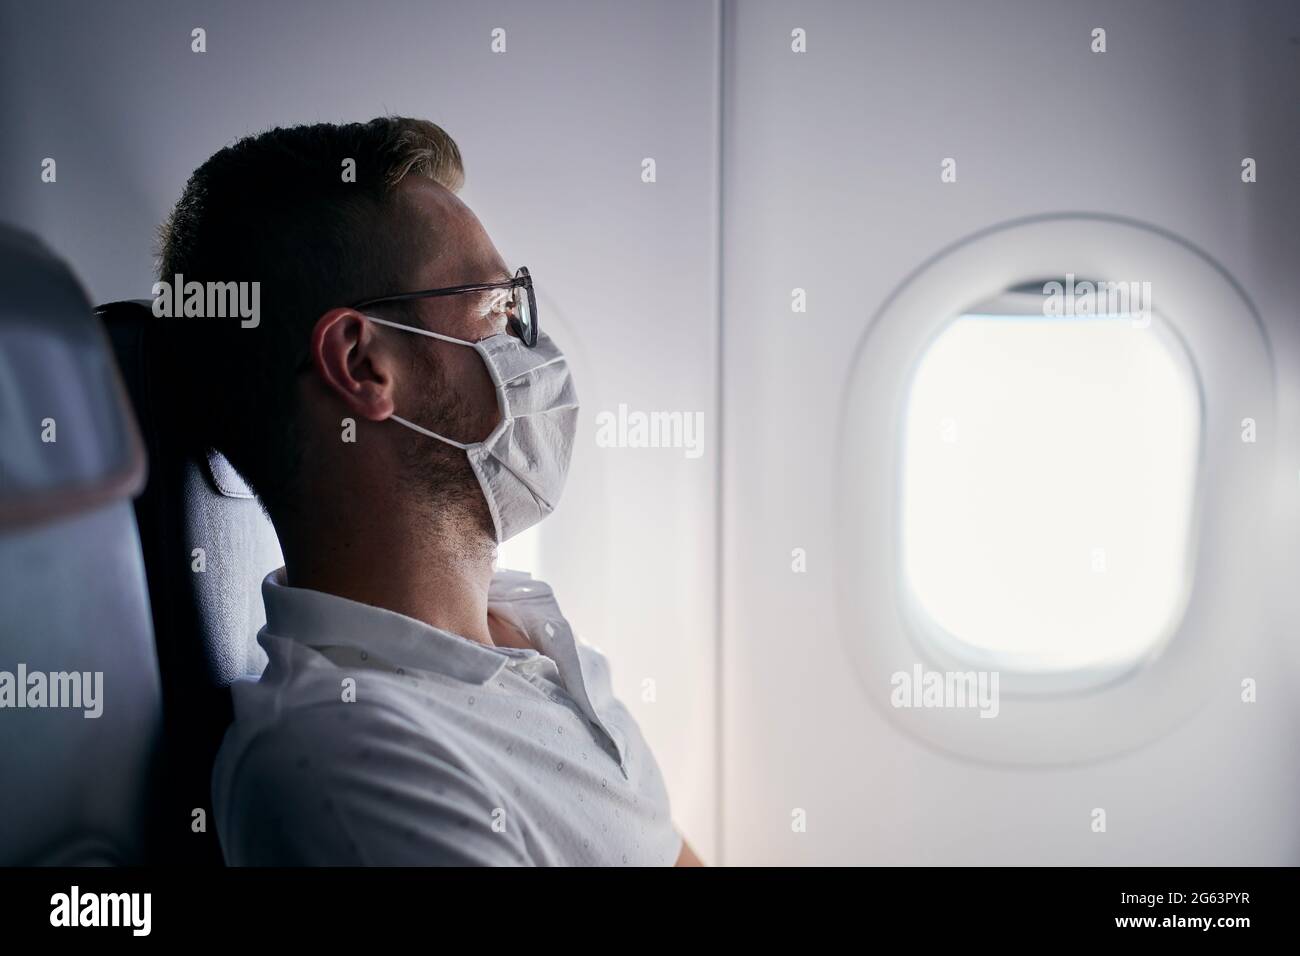 Passenger with protective face mask. Young man man looking out window of airplane. Themes traveling in new normal and personal protection during pande Stock Photo